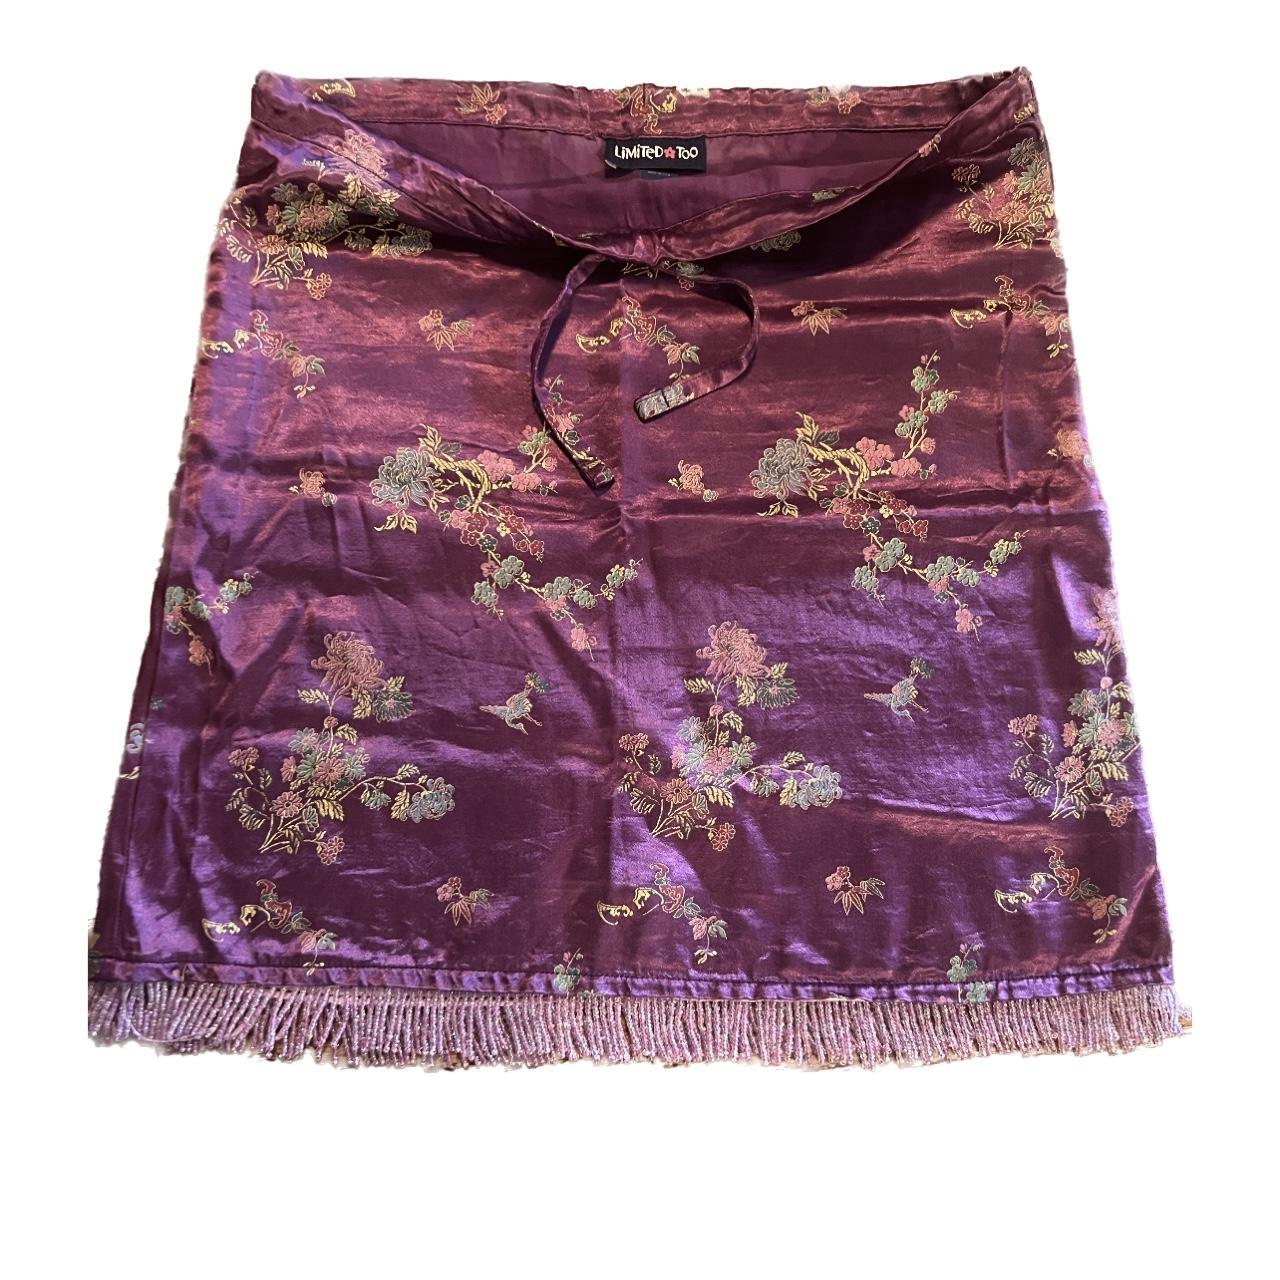 THE LIMITED Women's Purple and Pink Skirt